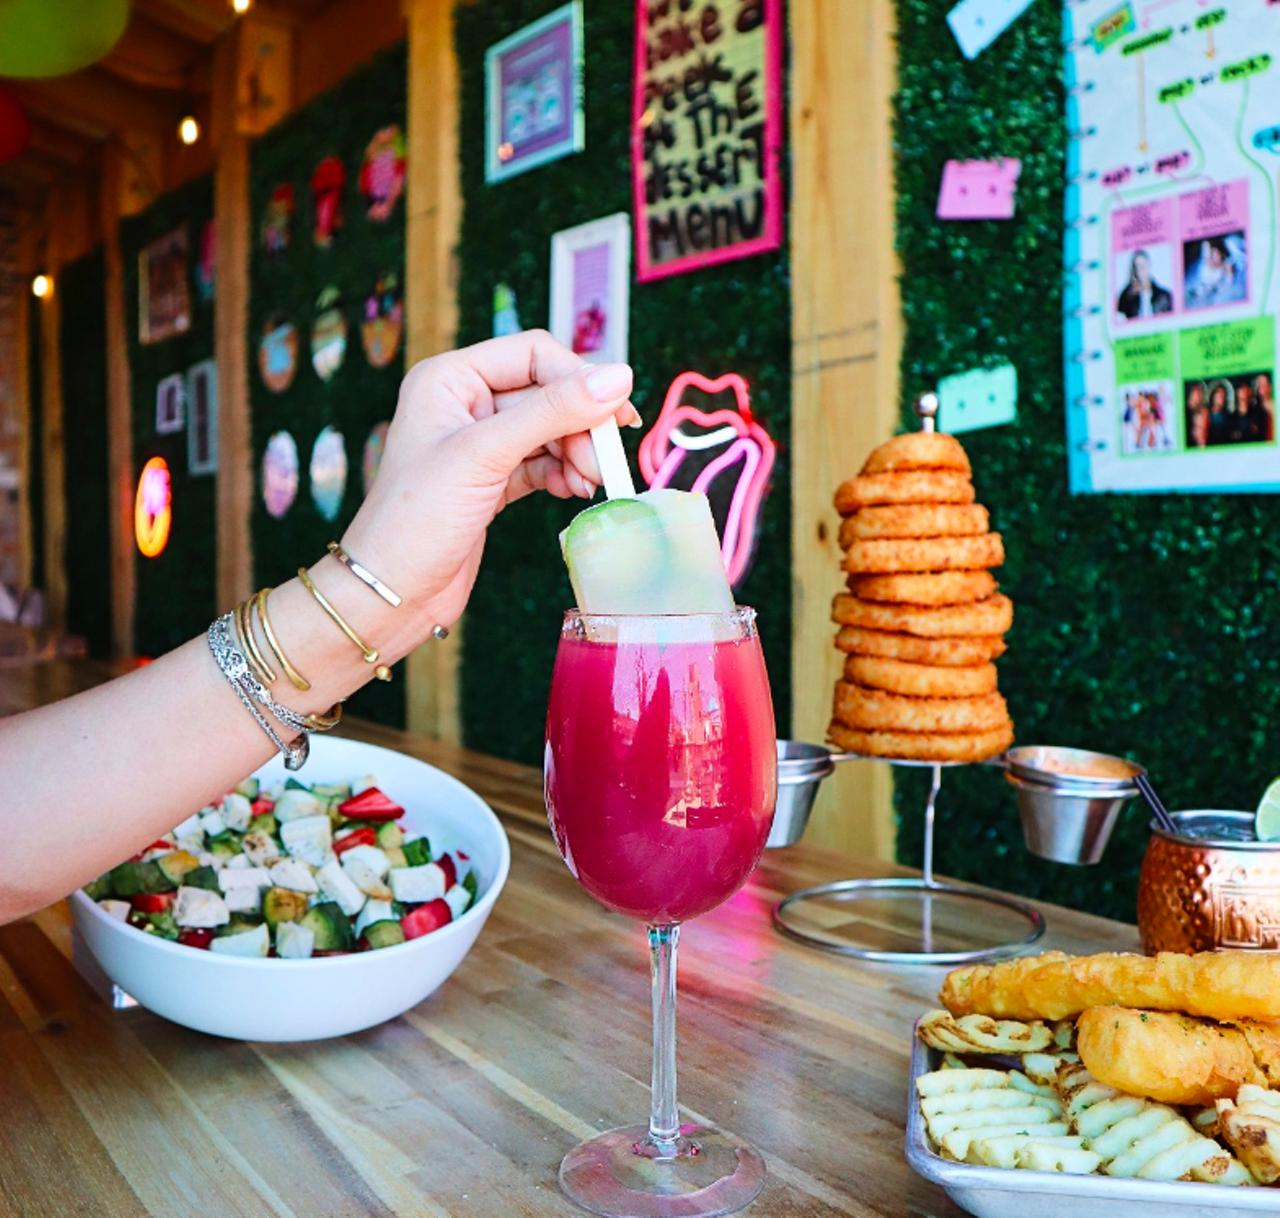 Jojo’s Shakebar
9101 International Drive
This old-school diner-themed eatery and bar is offering all the nostalgia with a side of over-the-top boozy shakes. The '80s/'90s retro-inspired decorations paired with creative desserts and elevated diner classics guarantees a good time.